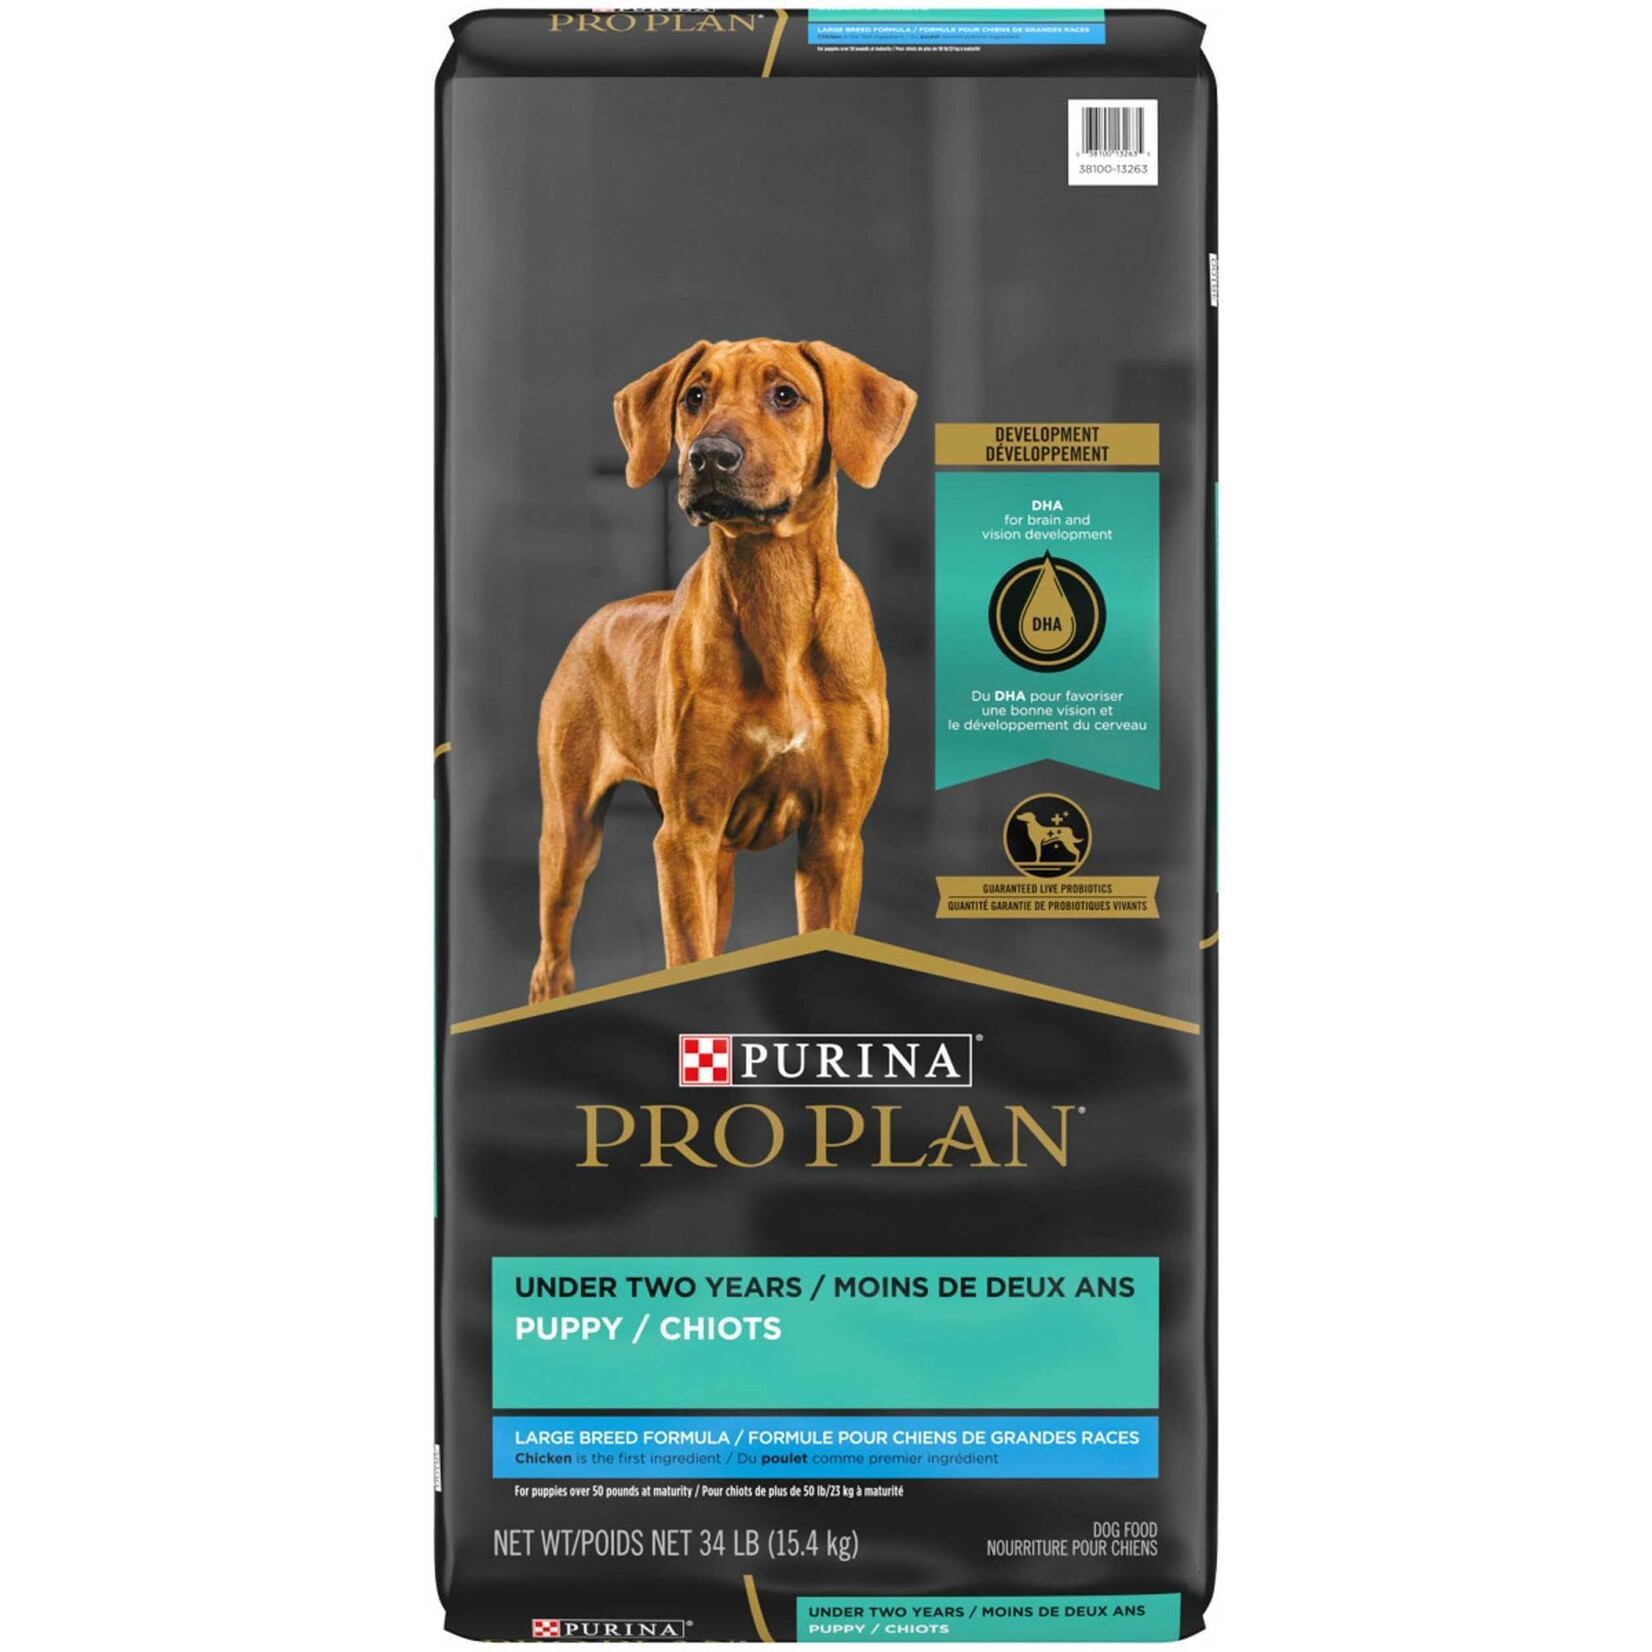 Purina Pro Plan Large Breed Puppy 15.4KG